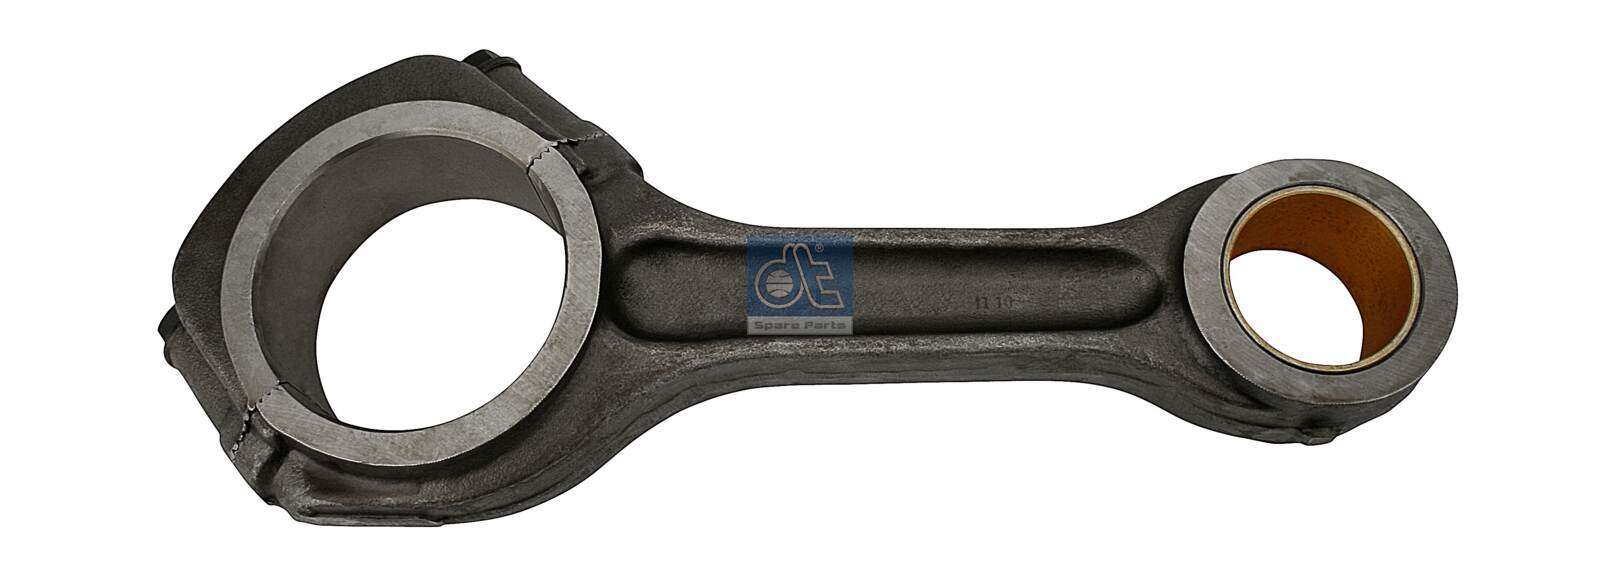 2.10340, Connecting Rod, DT Spare Parts, 1545299, 030.1032, 030310100000, 04.11.006, 112165, 15839, 40170, 20060410000